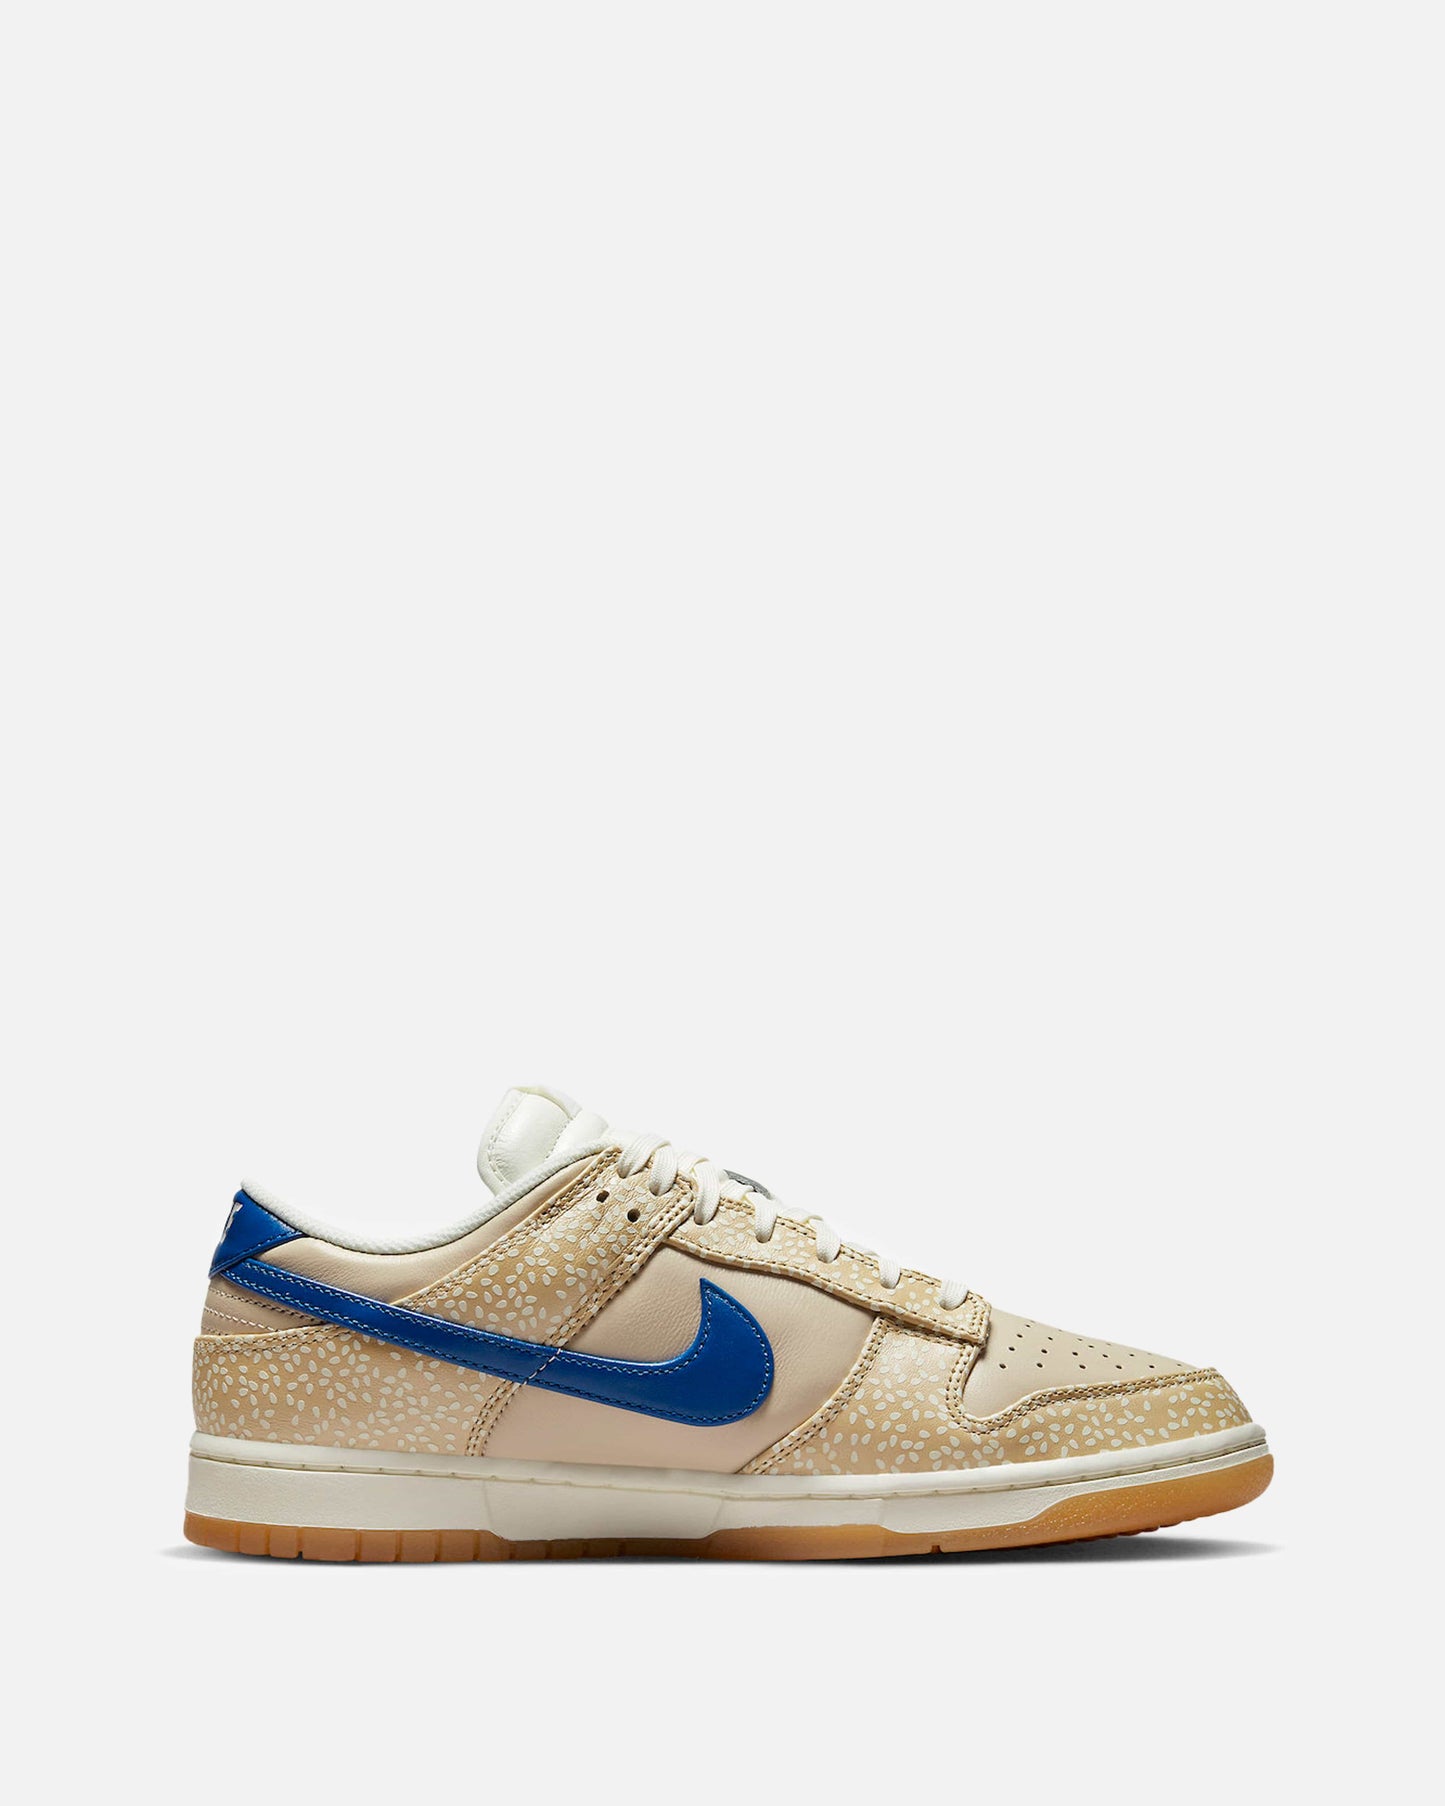 Nike Releases Nike Dunk Low 'Montreal Bagel'